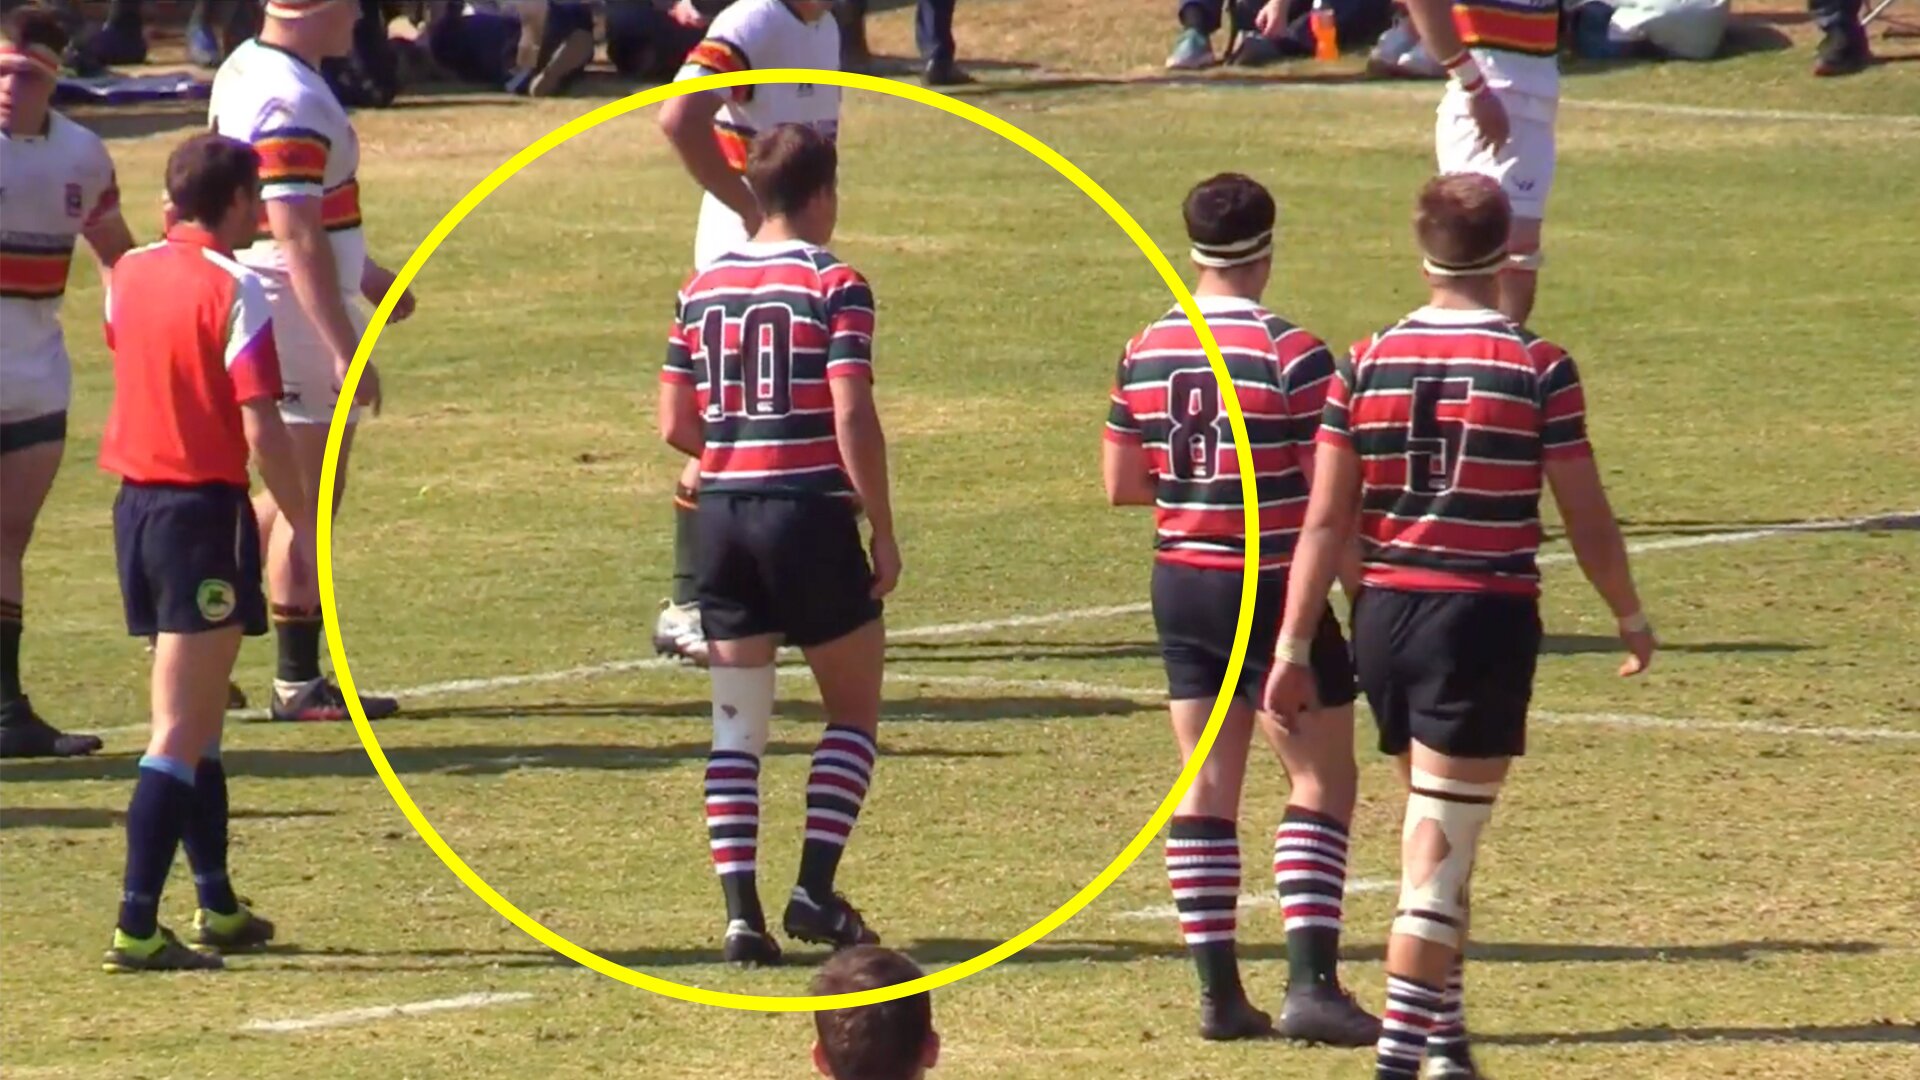 Footage shows schoolboy rugby player using incredible loophole to score sneaky try